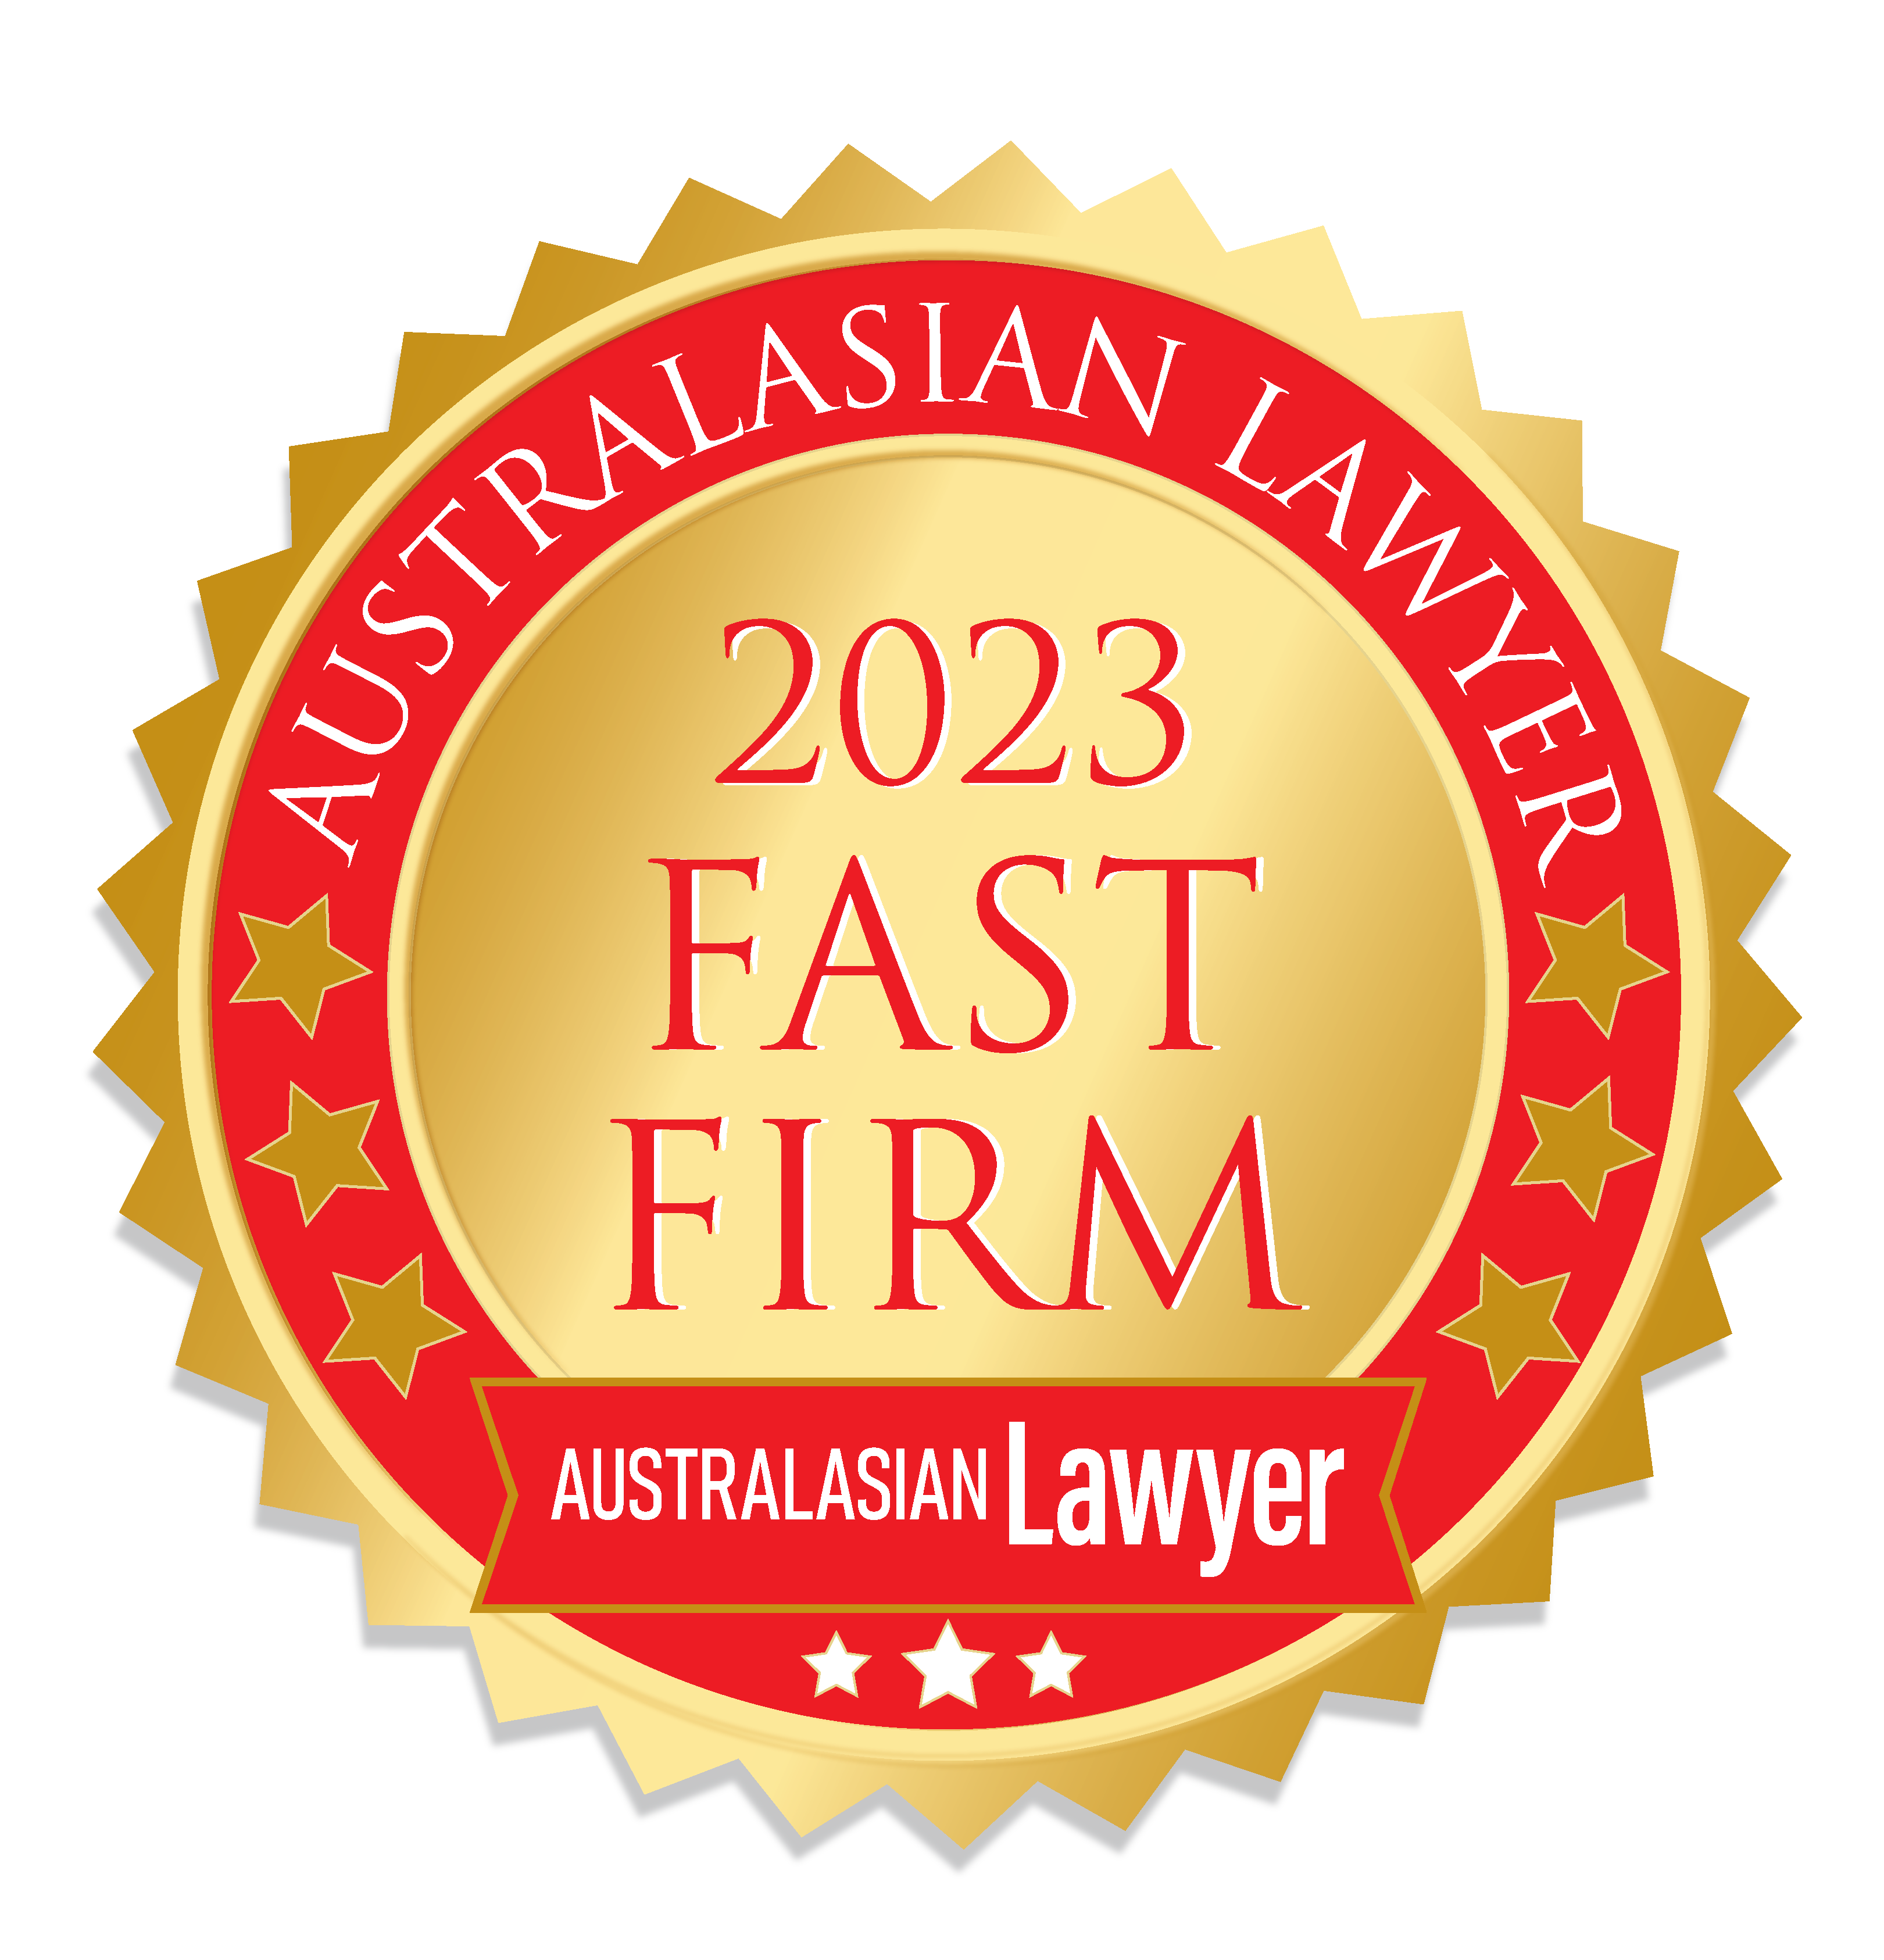 Picture of Australasian Lawyer 2023 Fast Firm award badge.